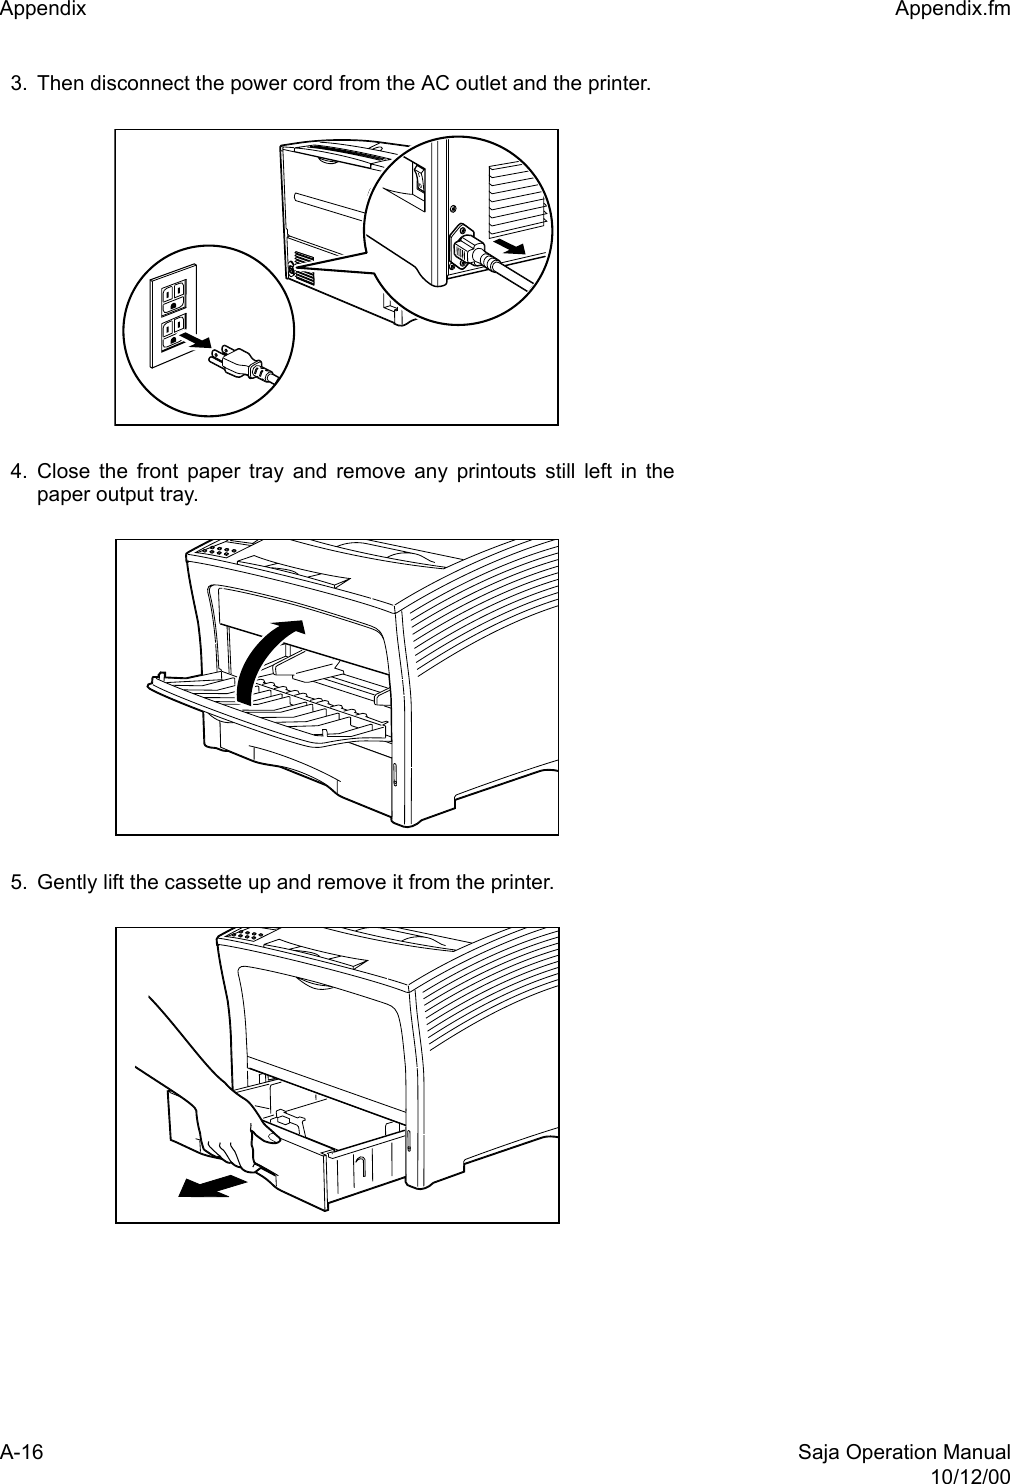 A-16 Saja Operation Manual10/12/00Appendix  Appendix.fm3. Then disconnect the power cord from the AC outlet and the printer.4. Close the front paper tray and remove any printouts still left in thepaper output tray. 5. Gently lift the cassette up and remove it from the printer. 